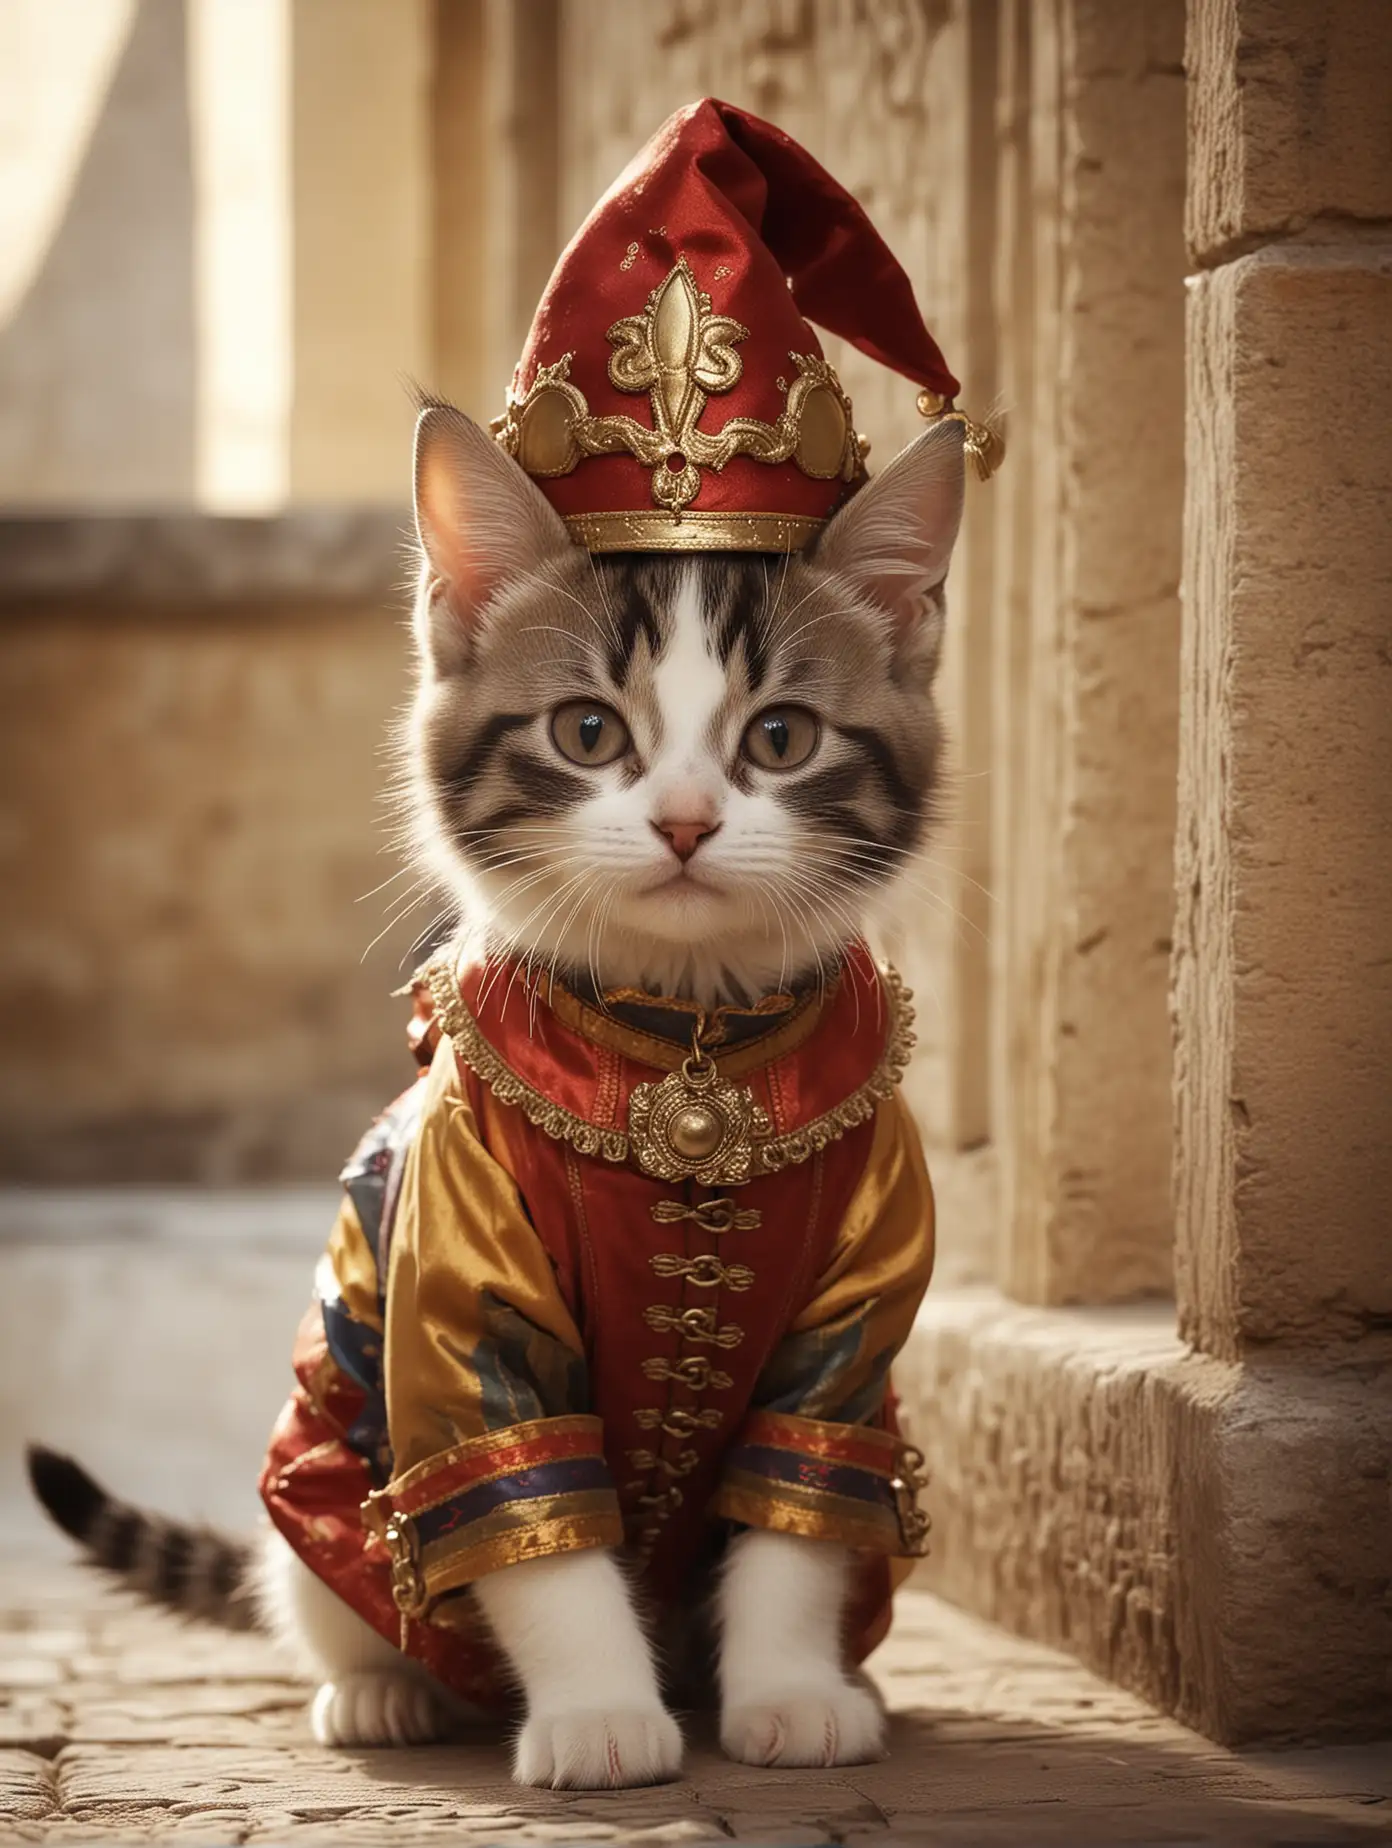 Adorable Kitten Jester in Ancient Castle Setting